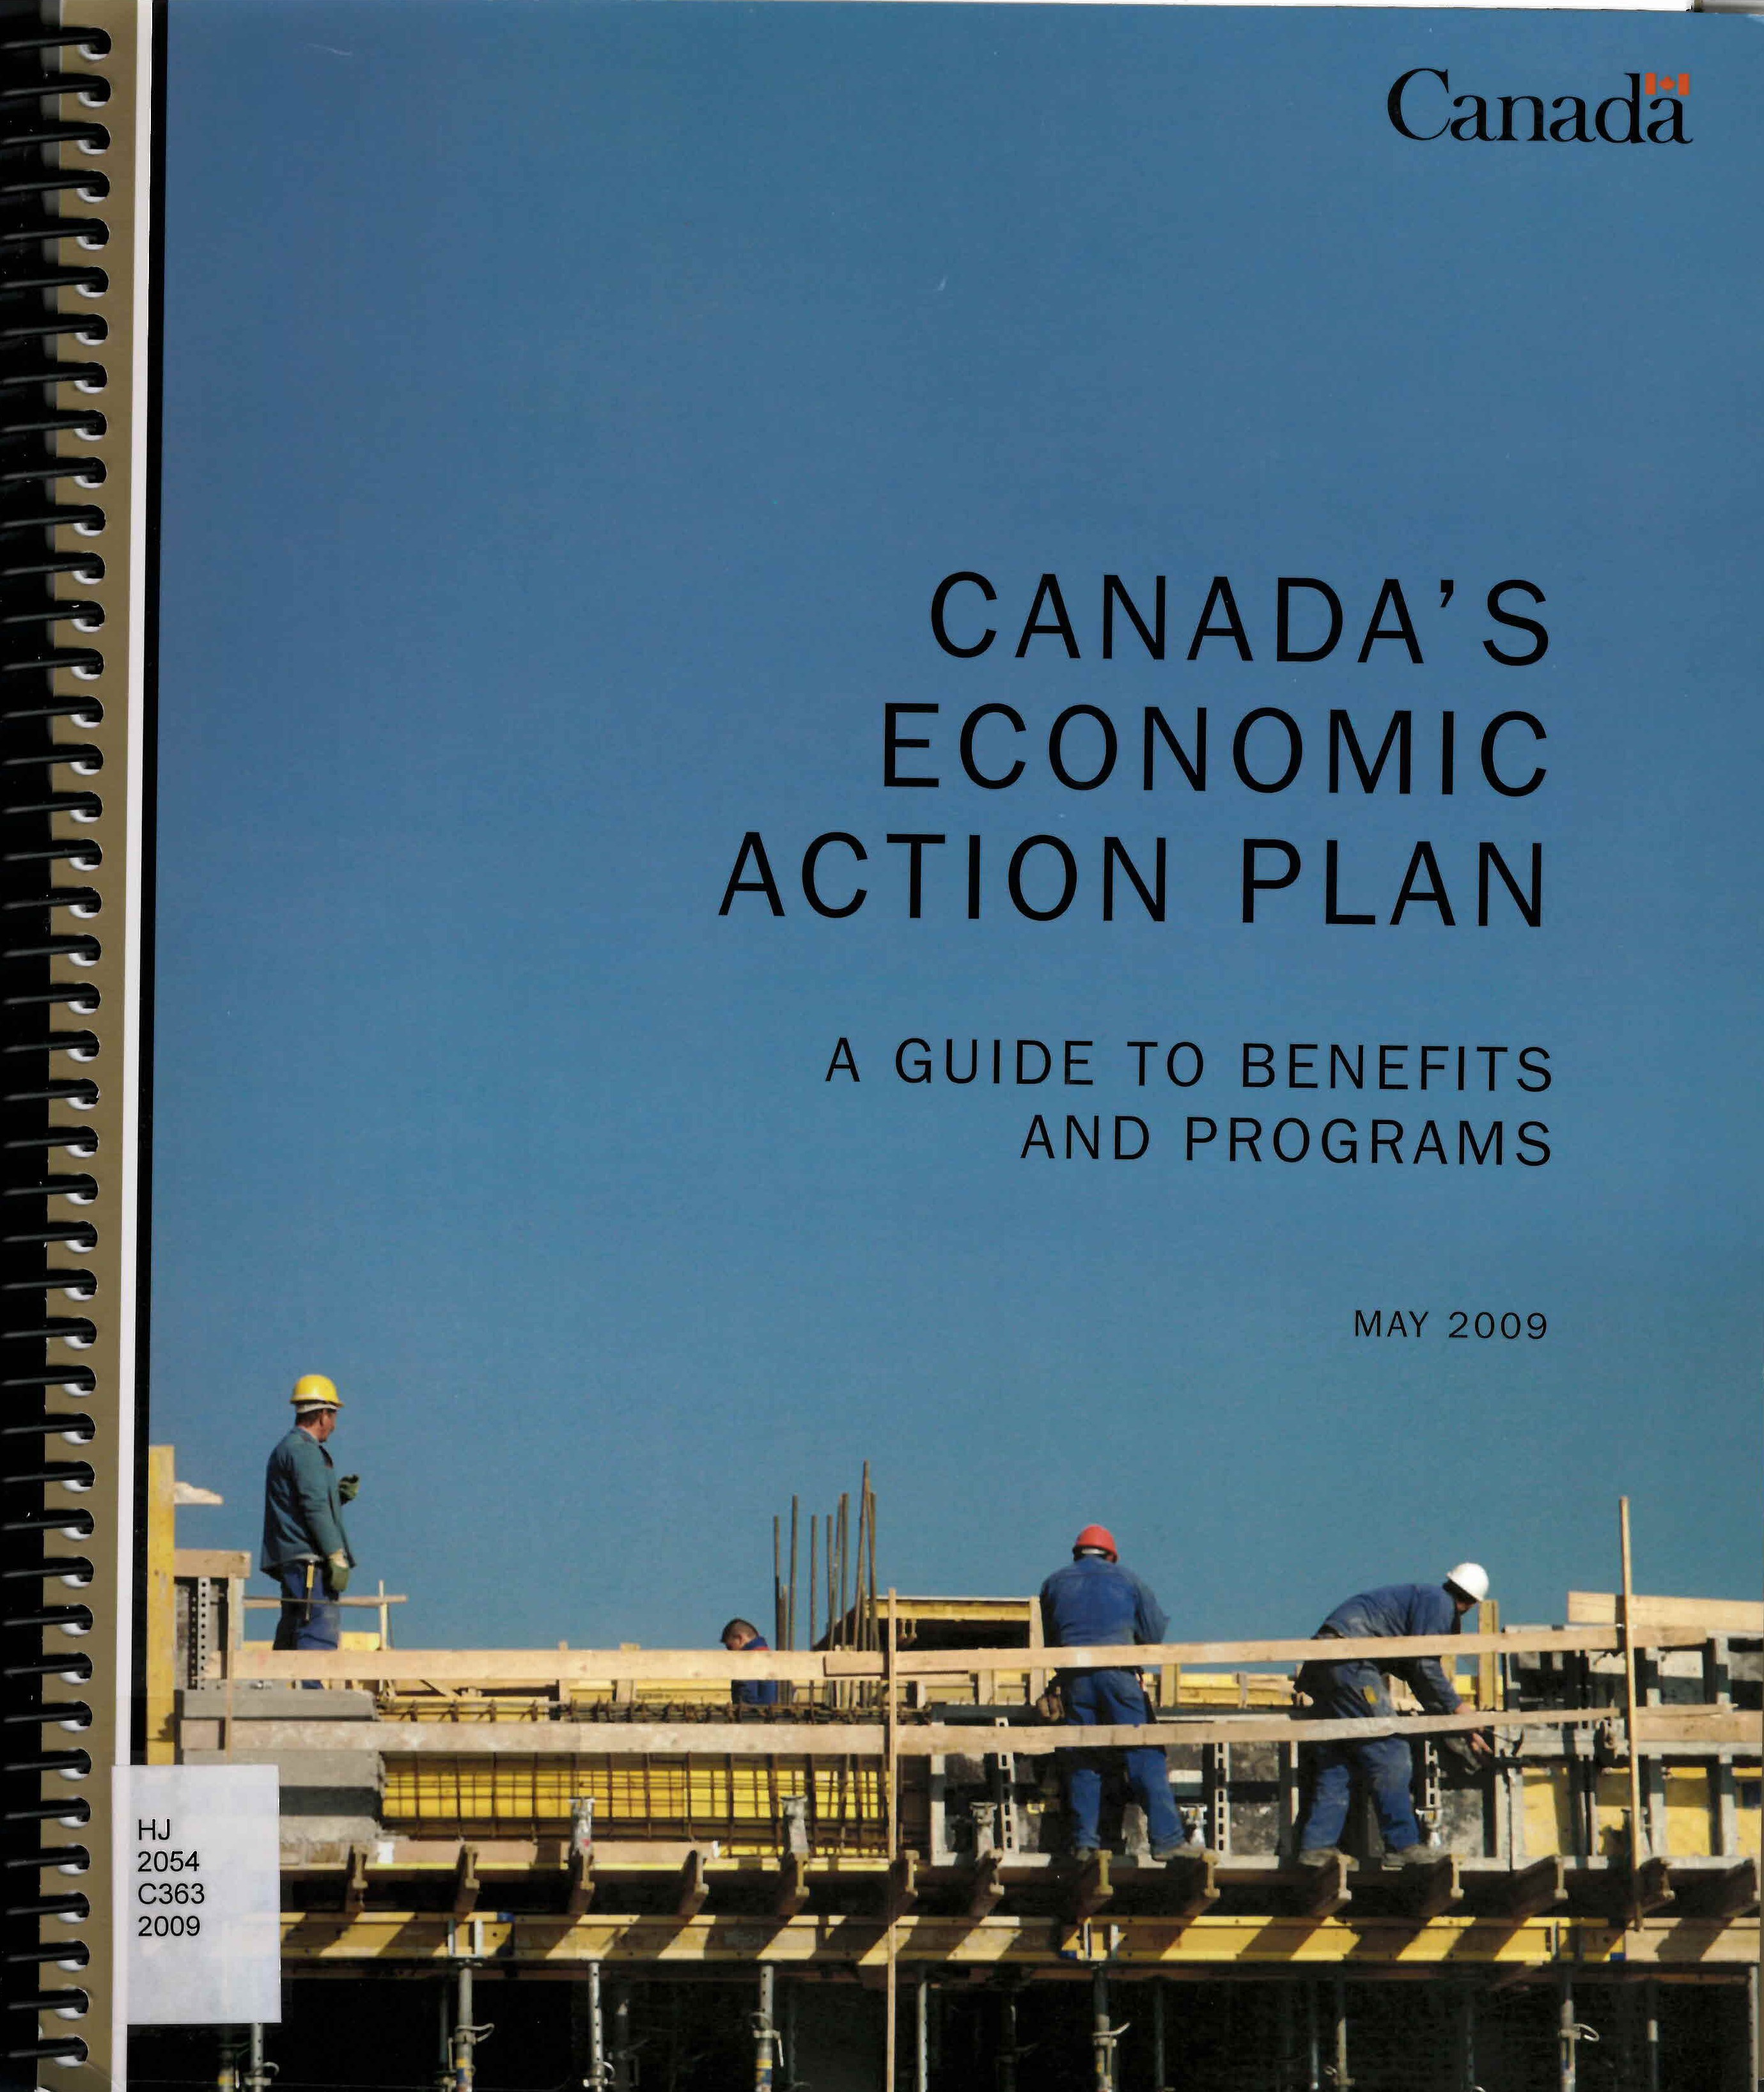 Canada's economic action plan : a guide to benefits and programs.